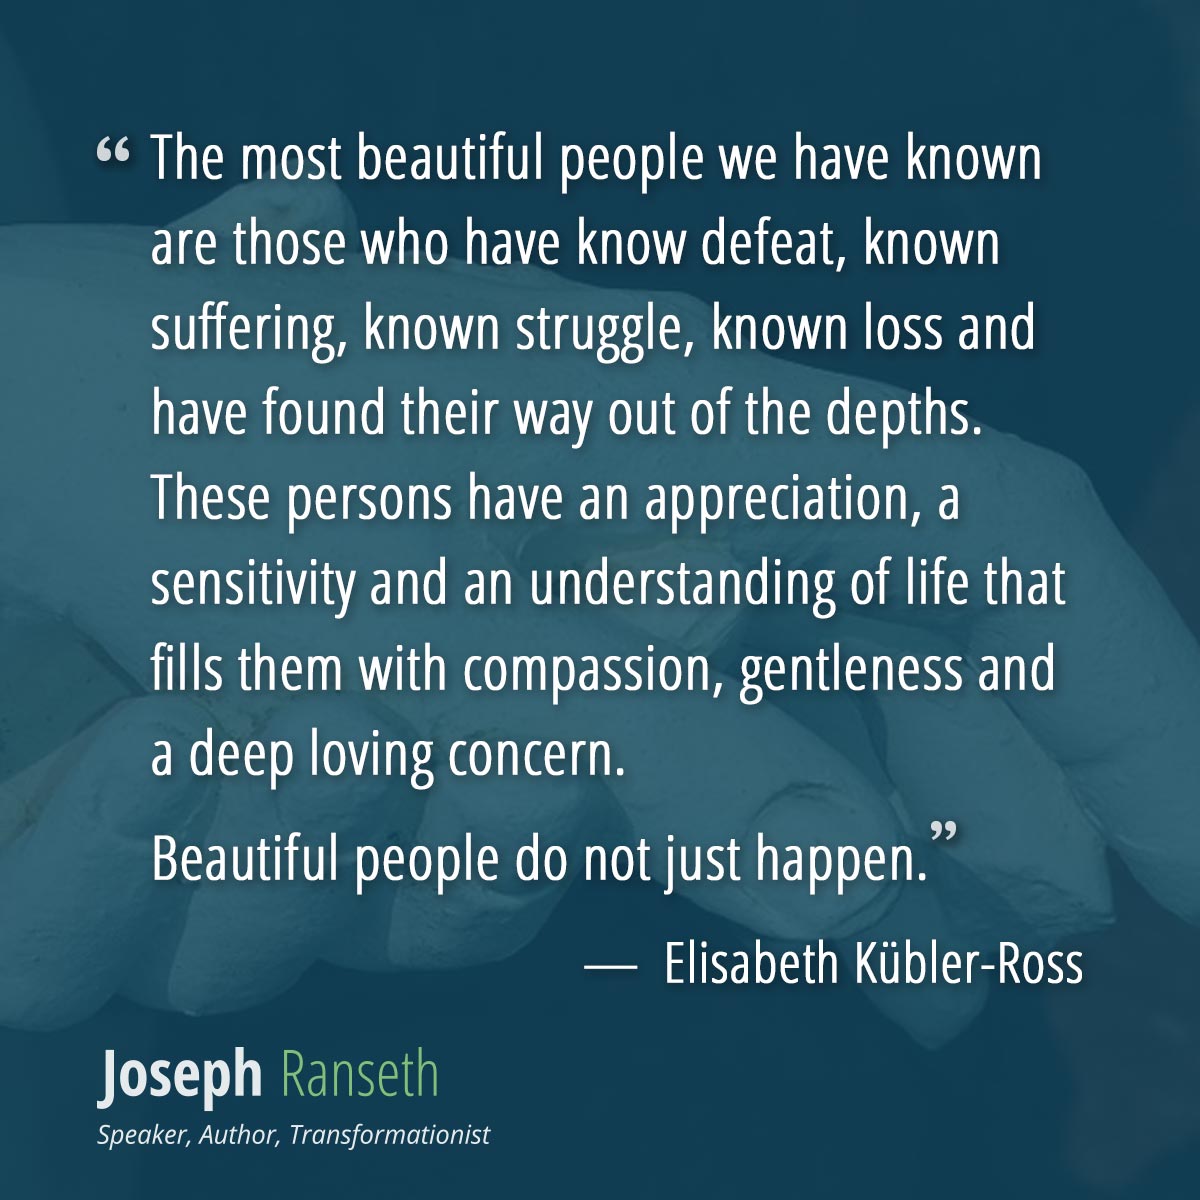 The most beautiful people we have known are those who have know defeat, known suffering, known struggle, known loss and have found their way out of the depths. These persons have an appreciation, a sensitivity and an understanding of life that fills them with compassion, gentleness and a deep loving concern. Beautiful people do not just happen.  ~ Elisabeth Kübler-Ross